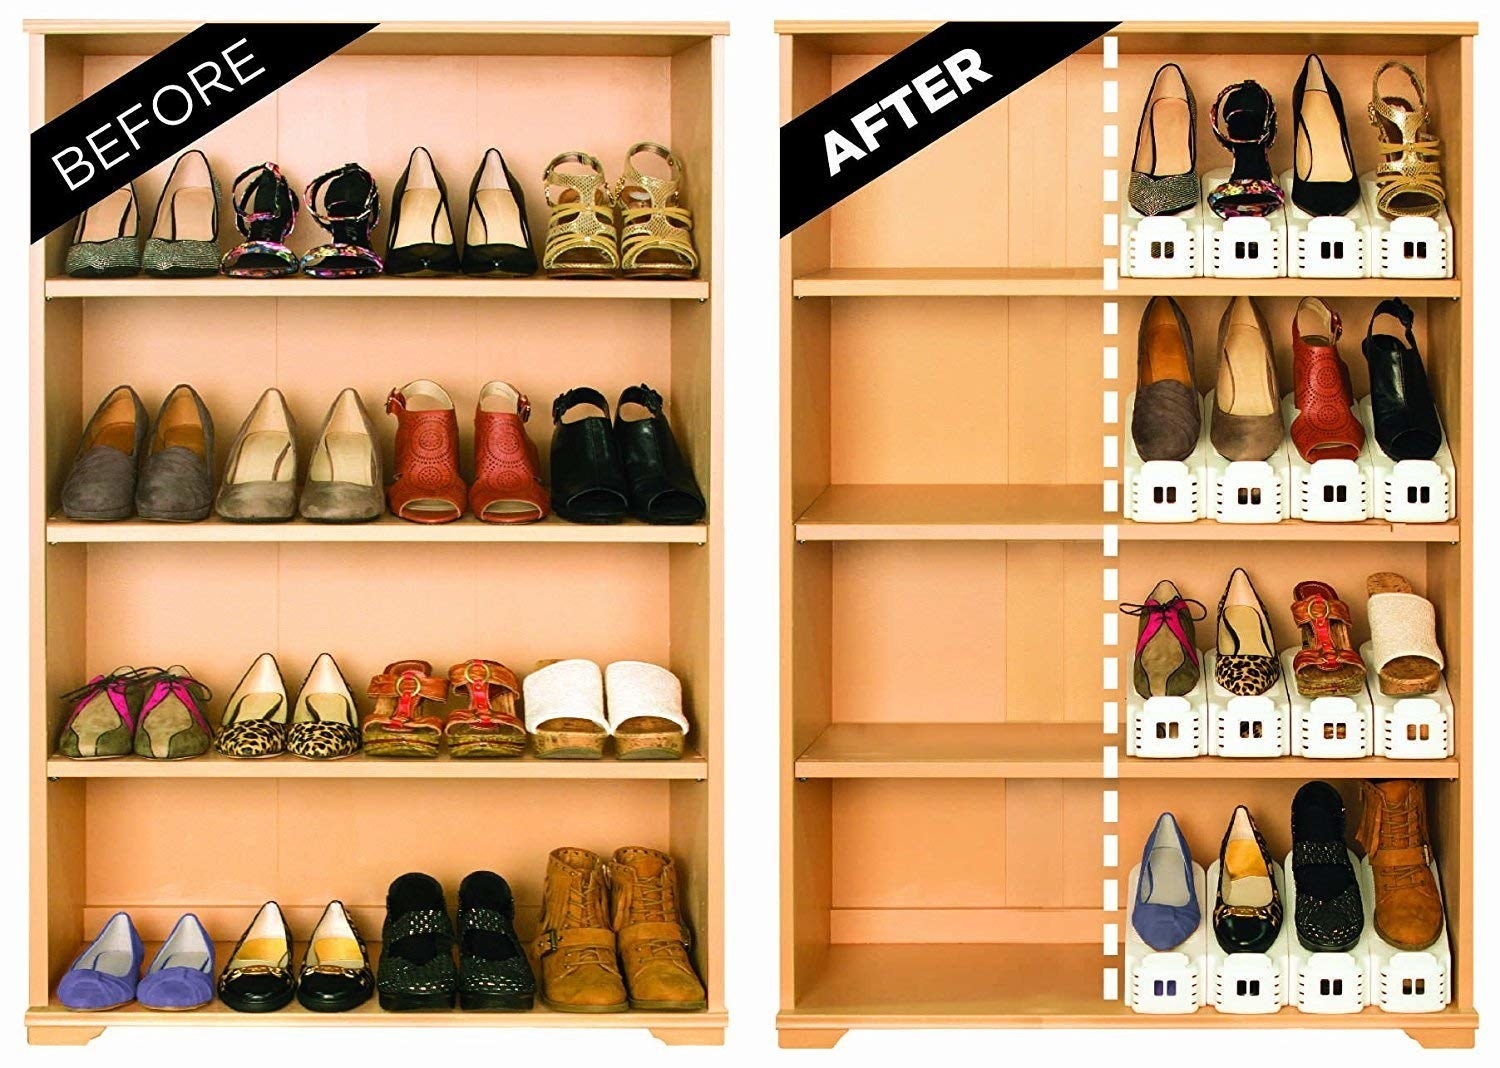 Looking To Update Your Shoe Closet? Here Are Some Cute Options